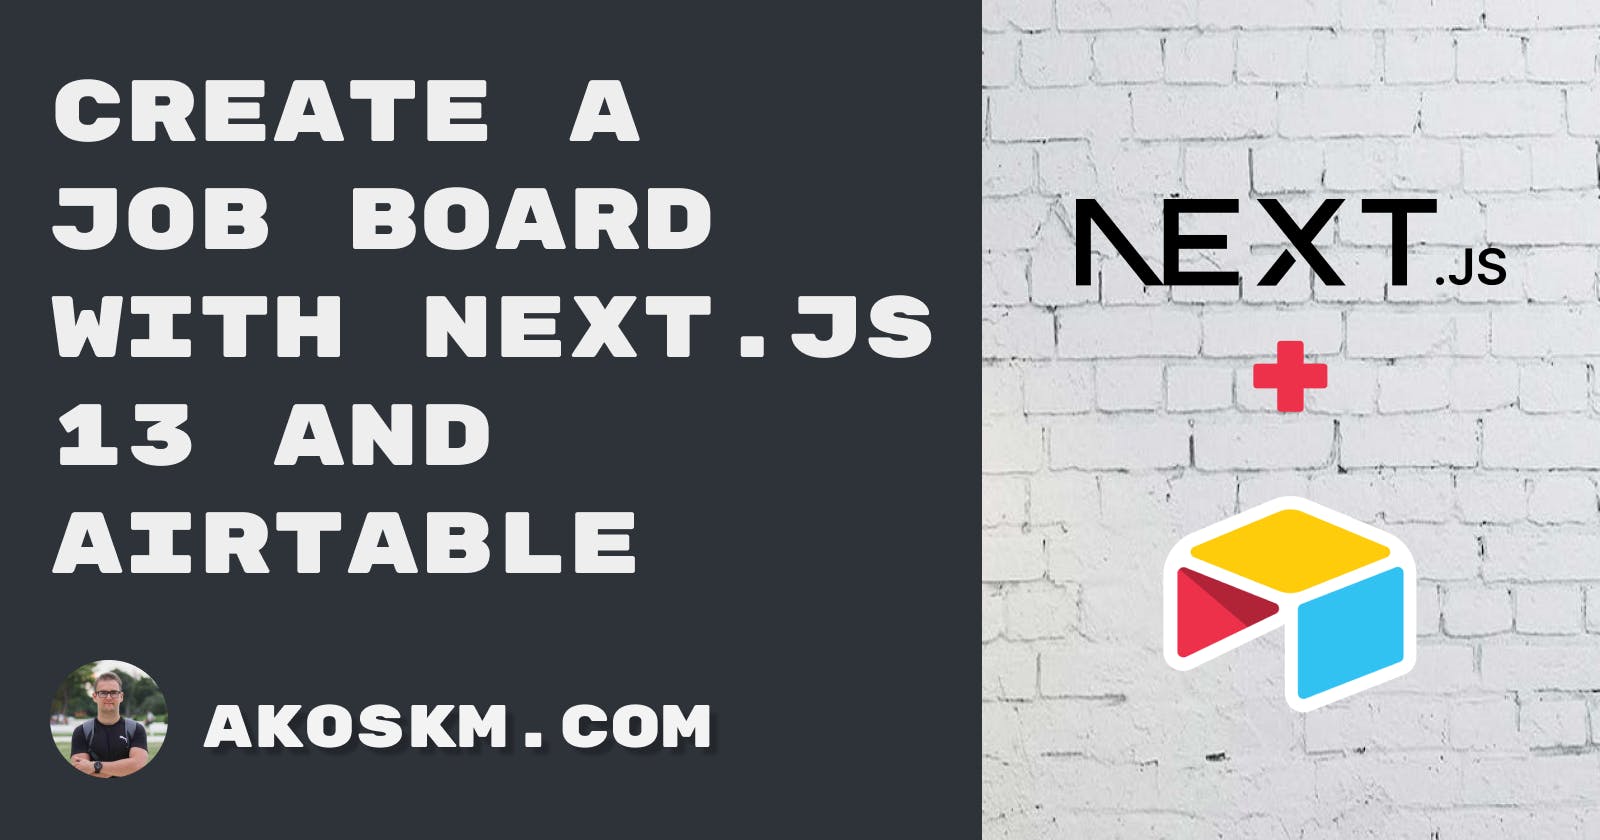 Create a Job Board with Next.js 13 and Airtable